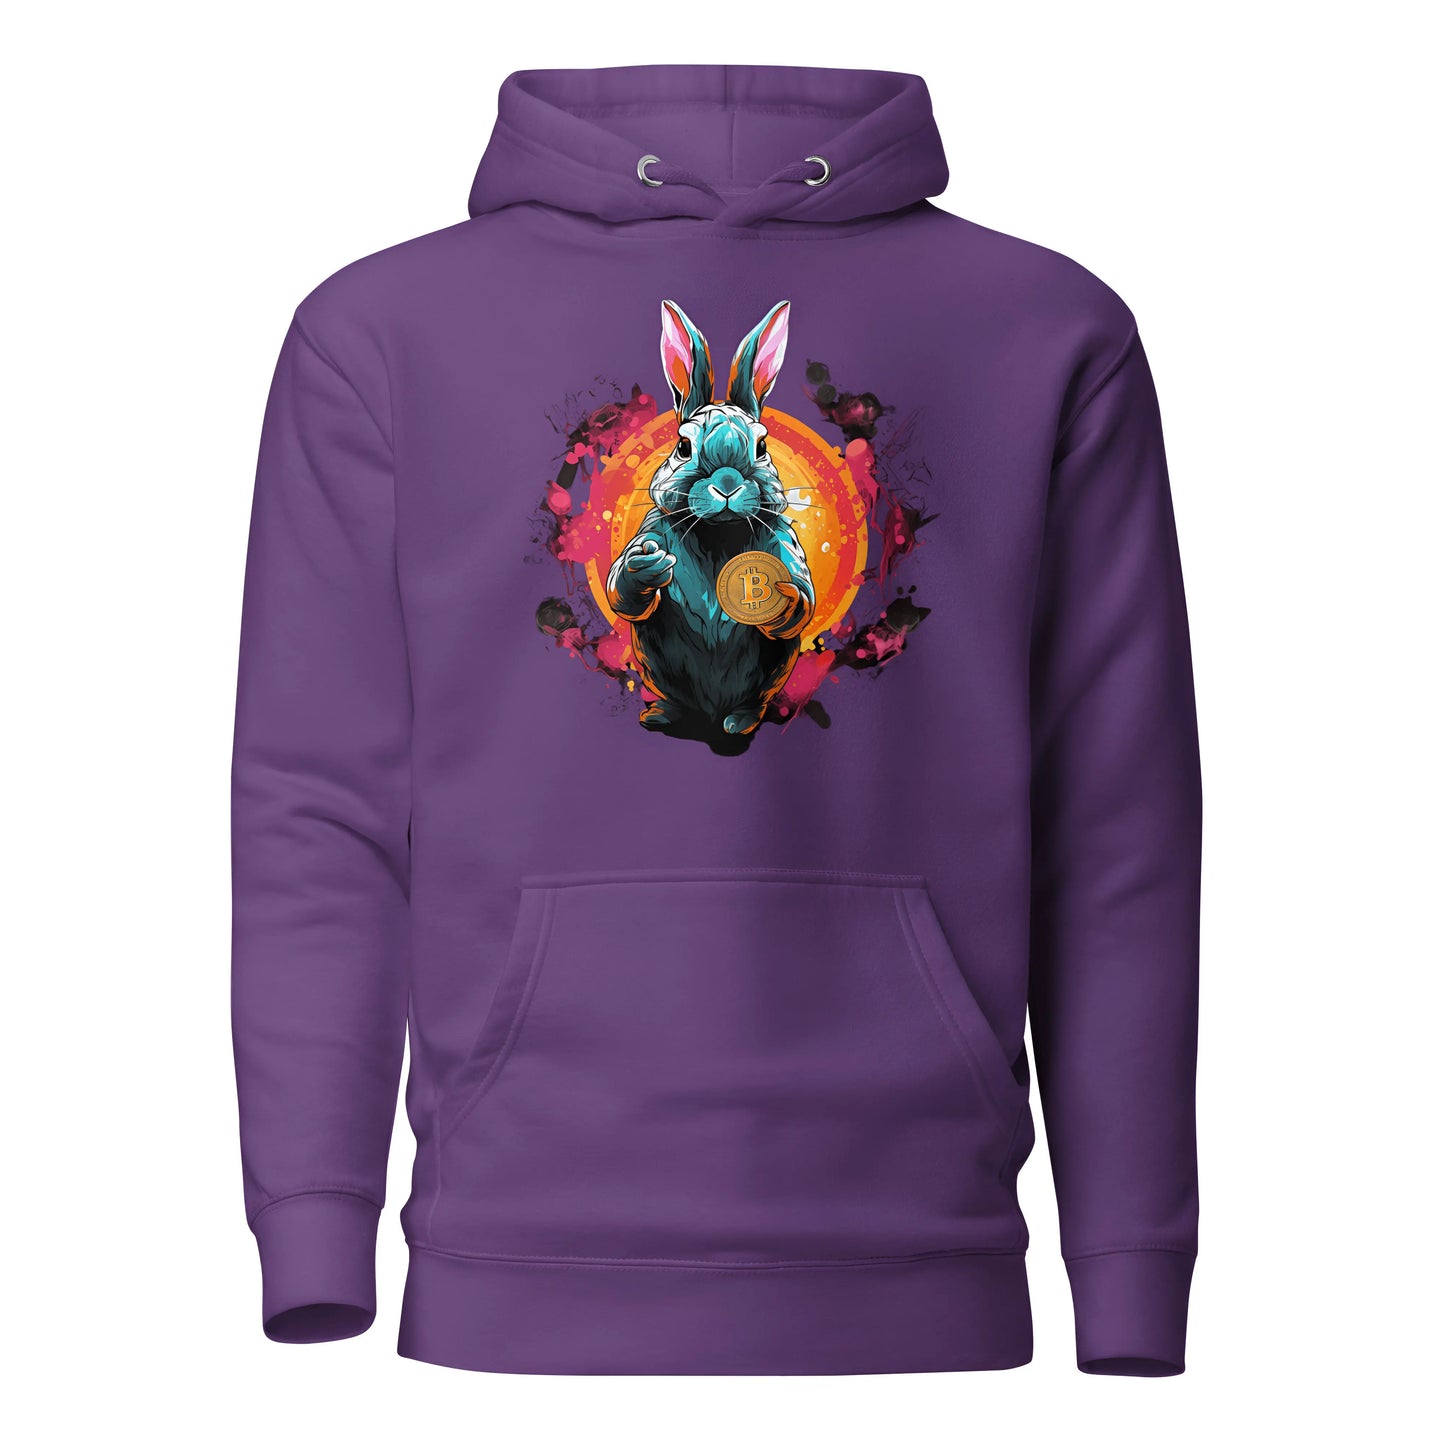 Falling Down The Bitcoin Rabbit Hole - Premium Unisex Bitcoin Hoodie - Join us Too! Purple Color